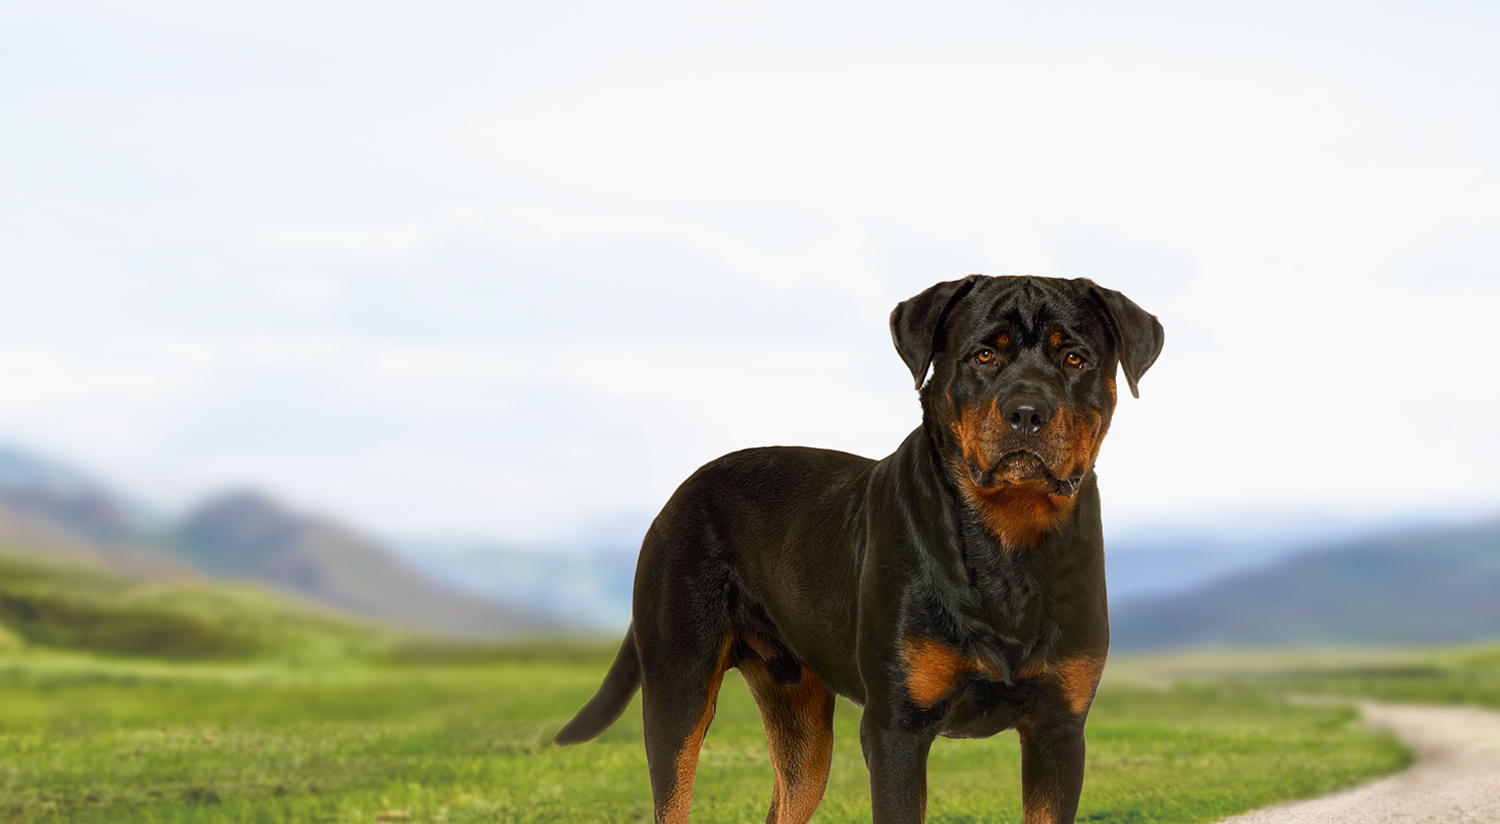 Dry dog food for adult Rottweilers